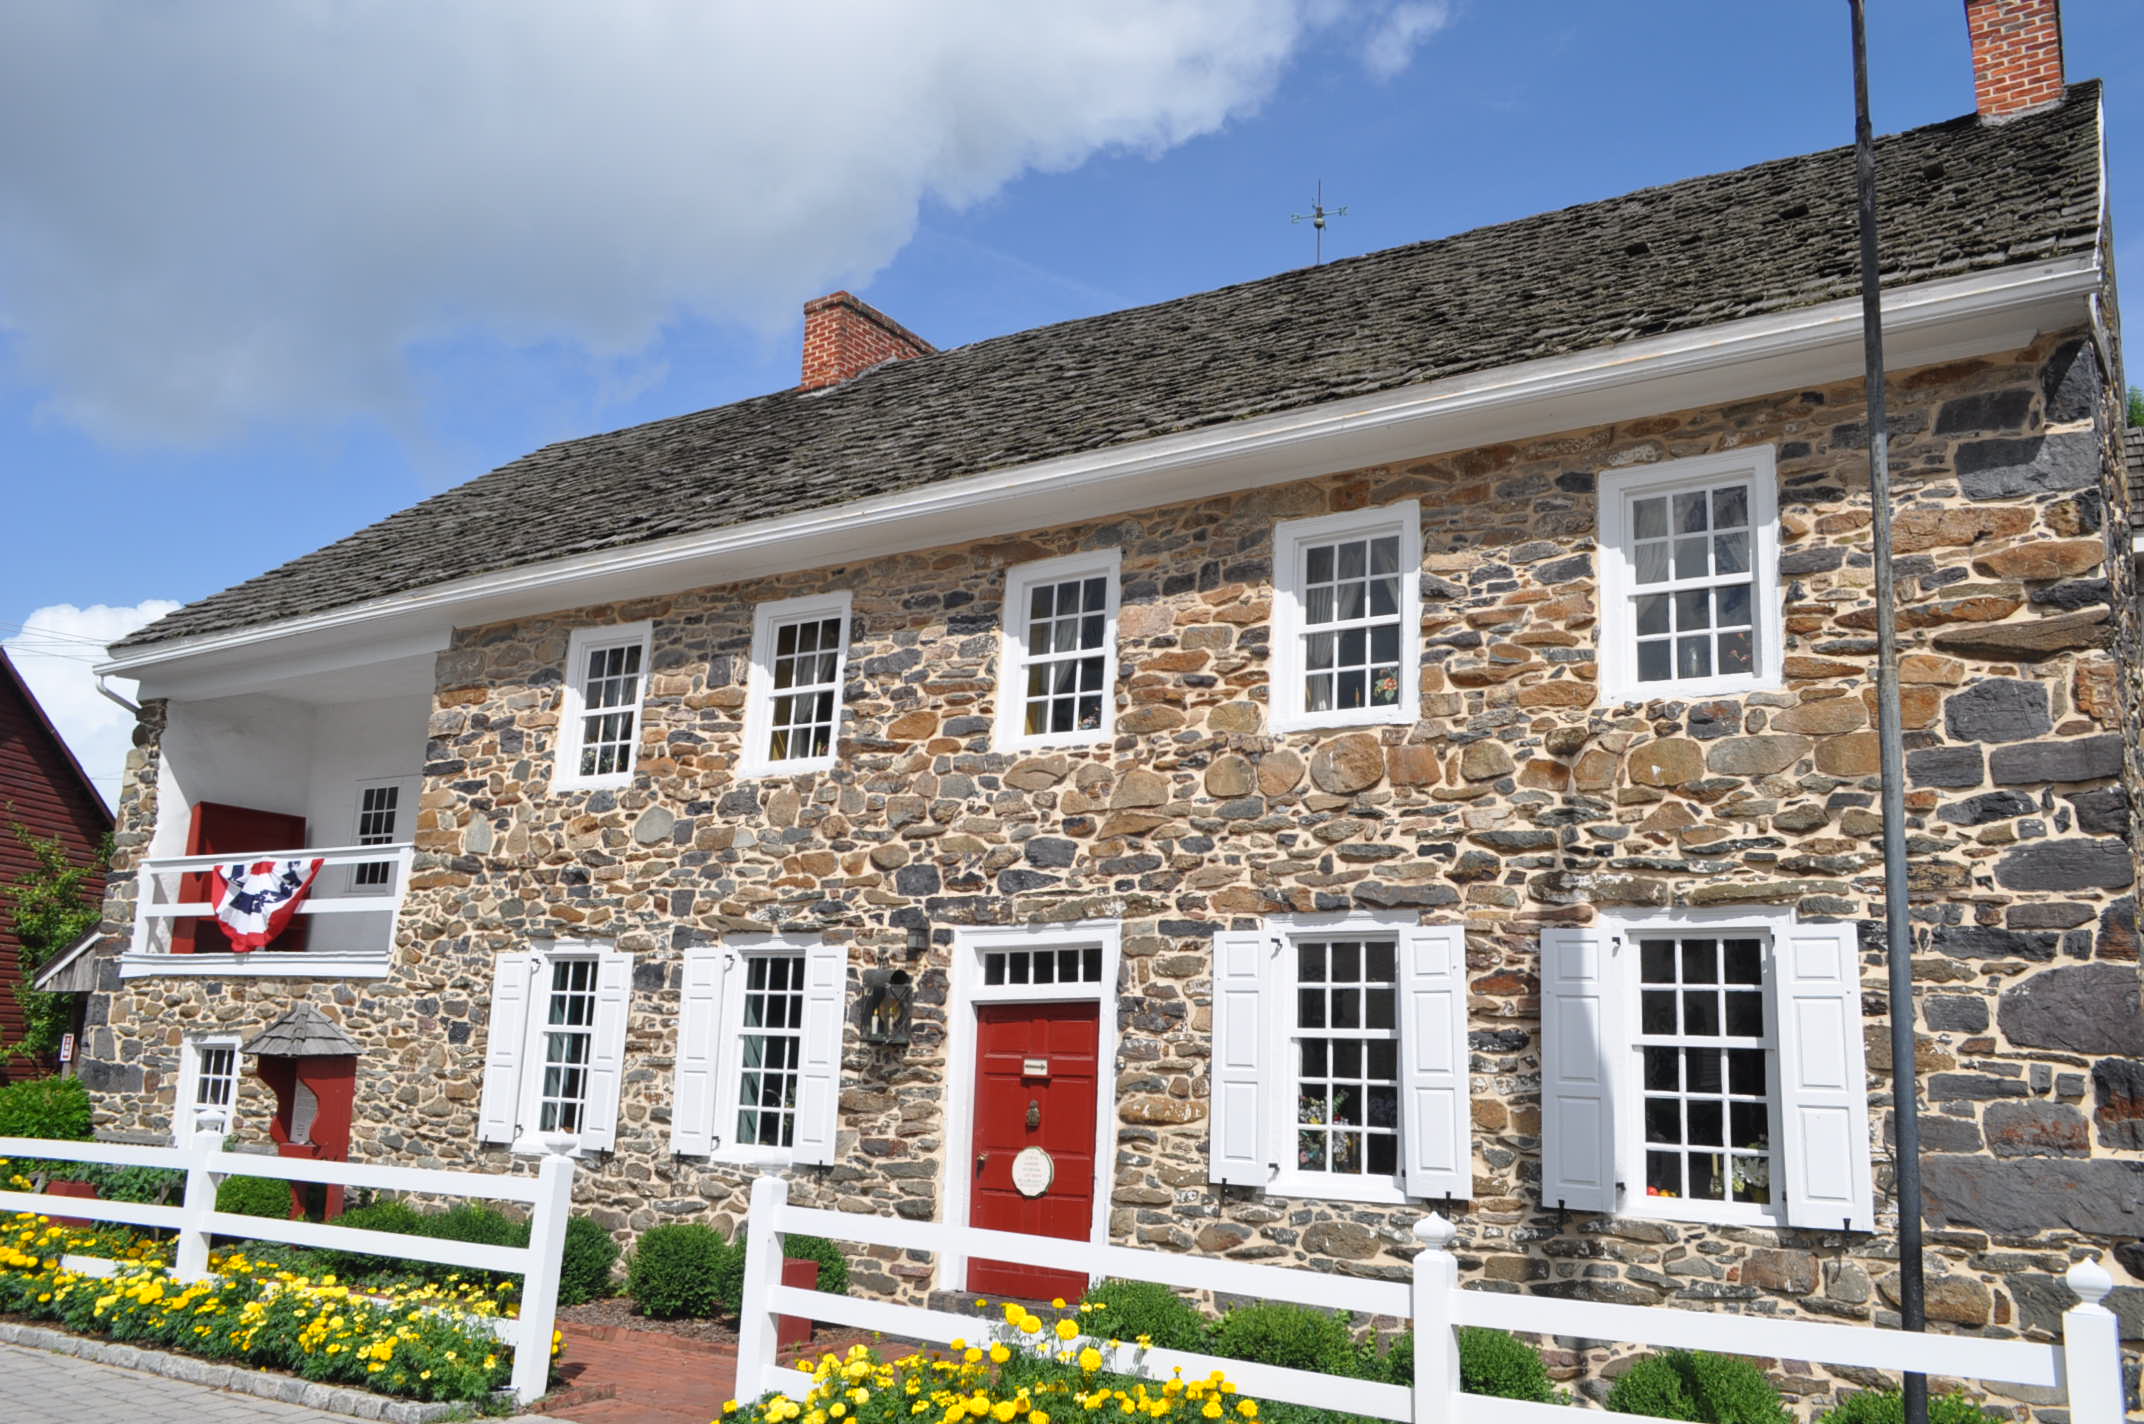 Four Score and Seven years before the Civil War Battle of Gettysburg, (1776),  Reverend Alexander Dobbin built a house to begin a new life in America for himself and 
his family. 